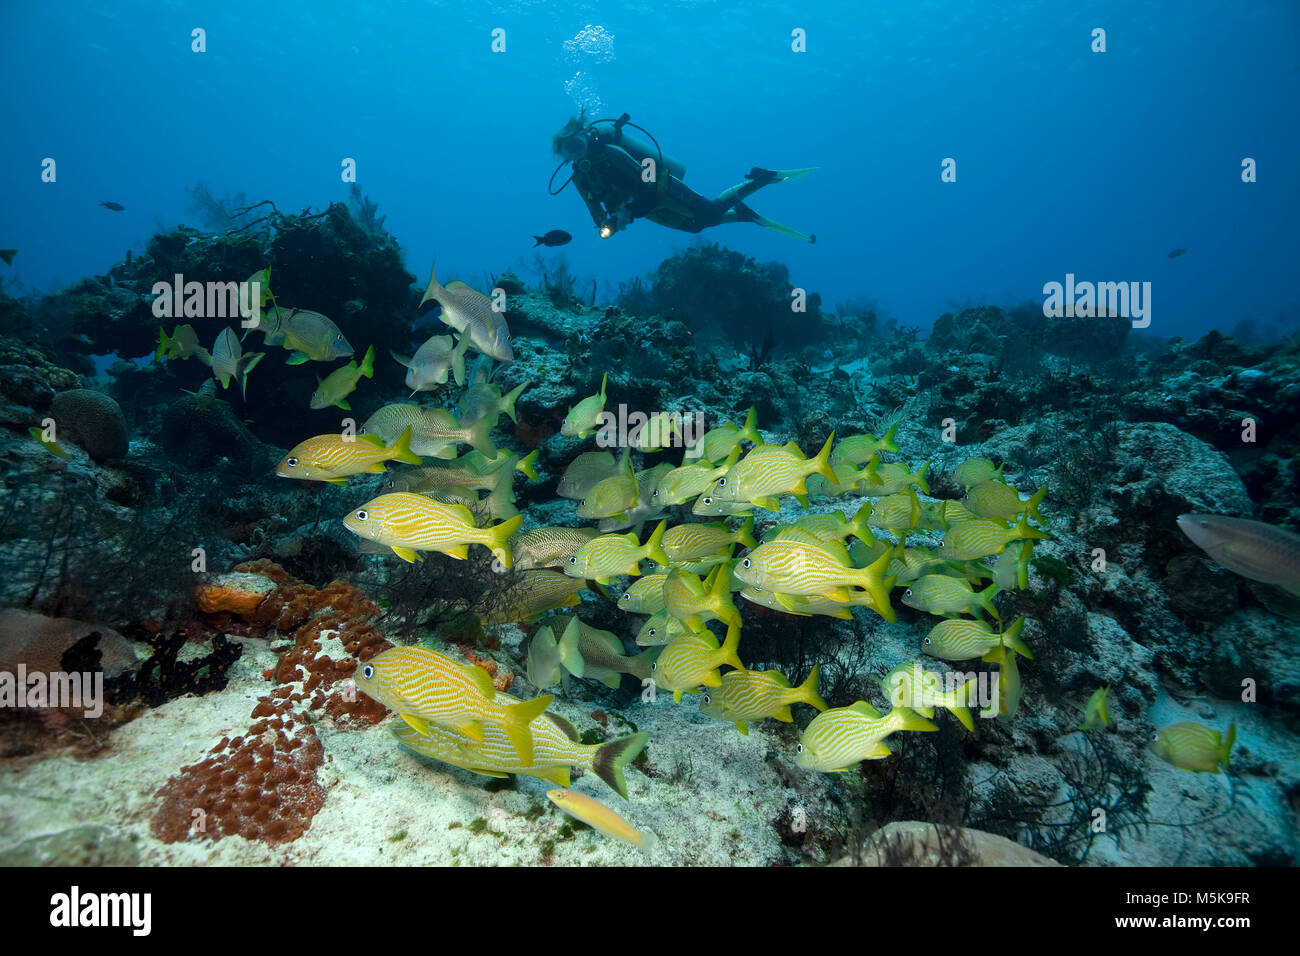 Scuba diver at a caribbean coral reef with french grunts (Haemulon flavolineatum), Cozumel, Mexico, Caribbean Stock Photo